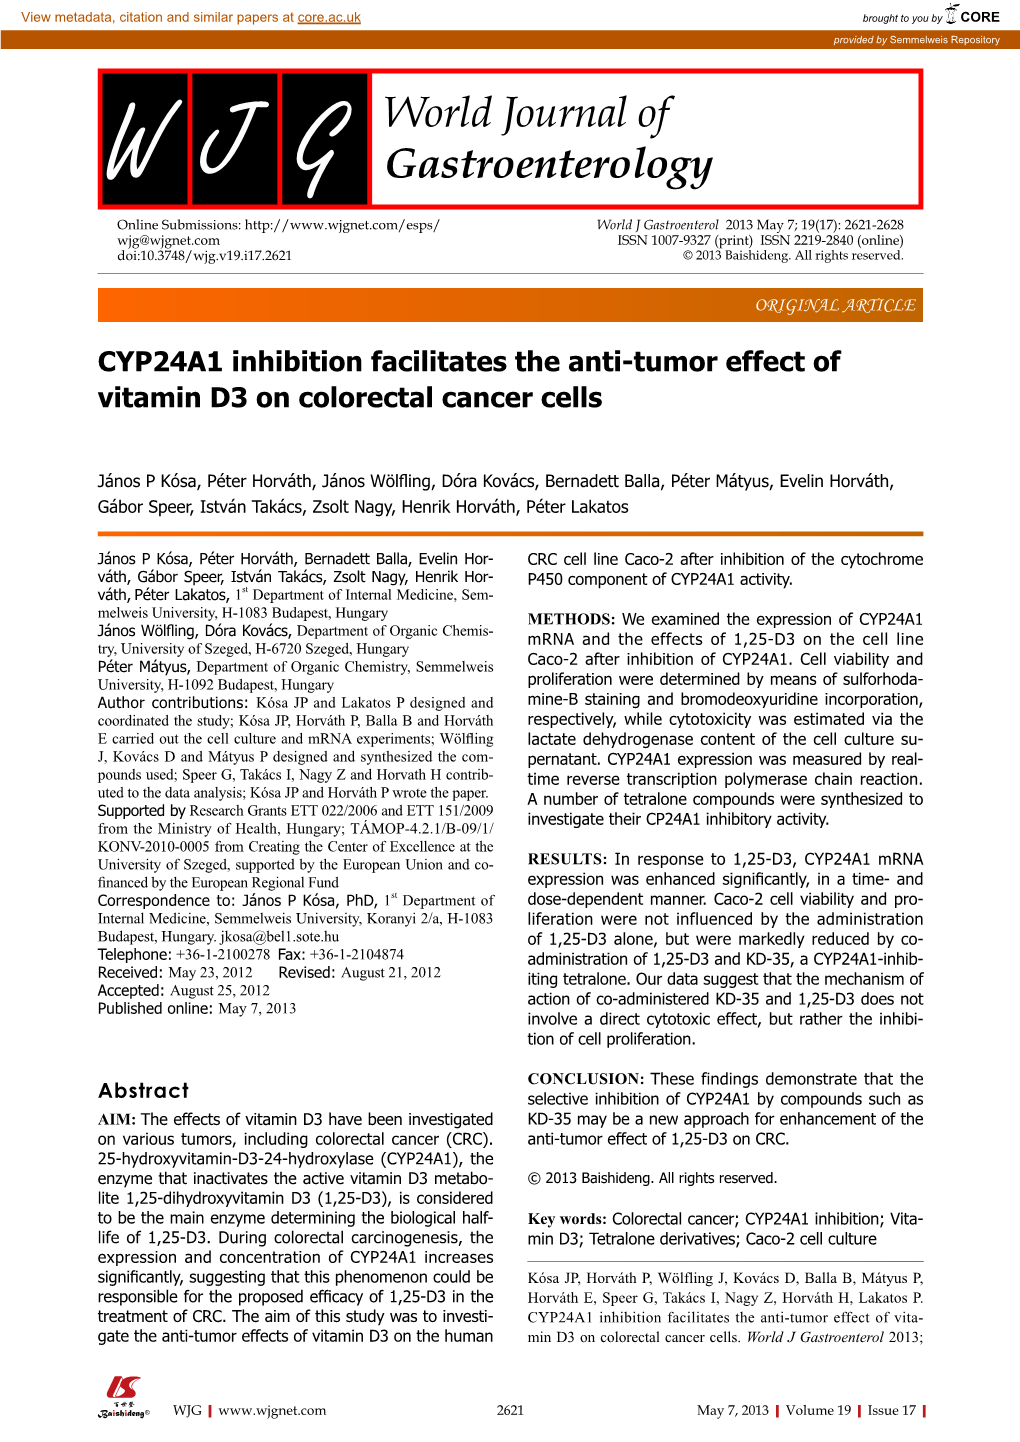 CYP24A1 Inhibition Facilitates the Anti-Tumor Effect of Vitamin D3 on Colorectal Cancer Cells